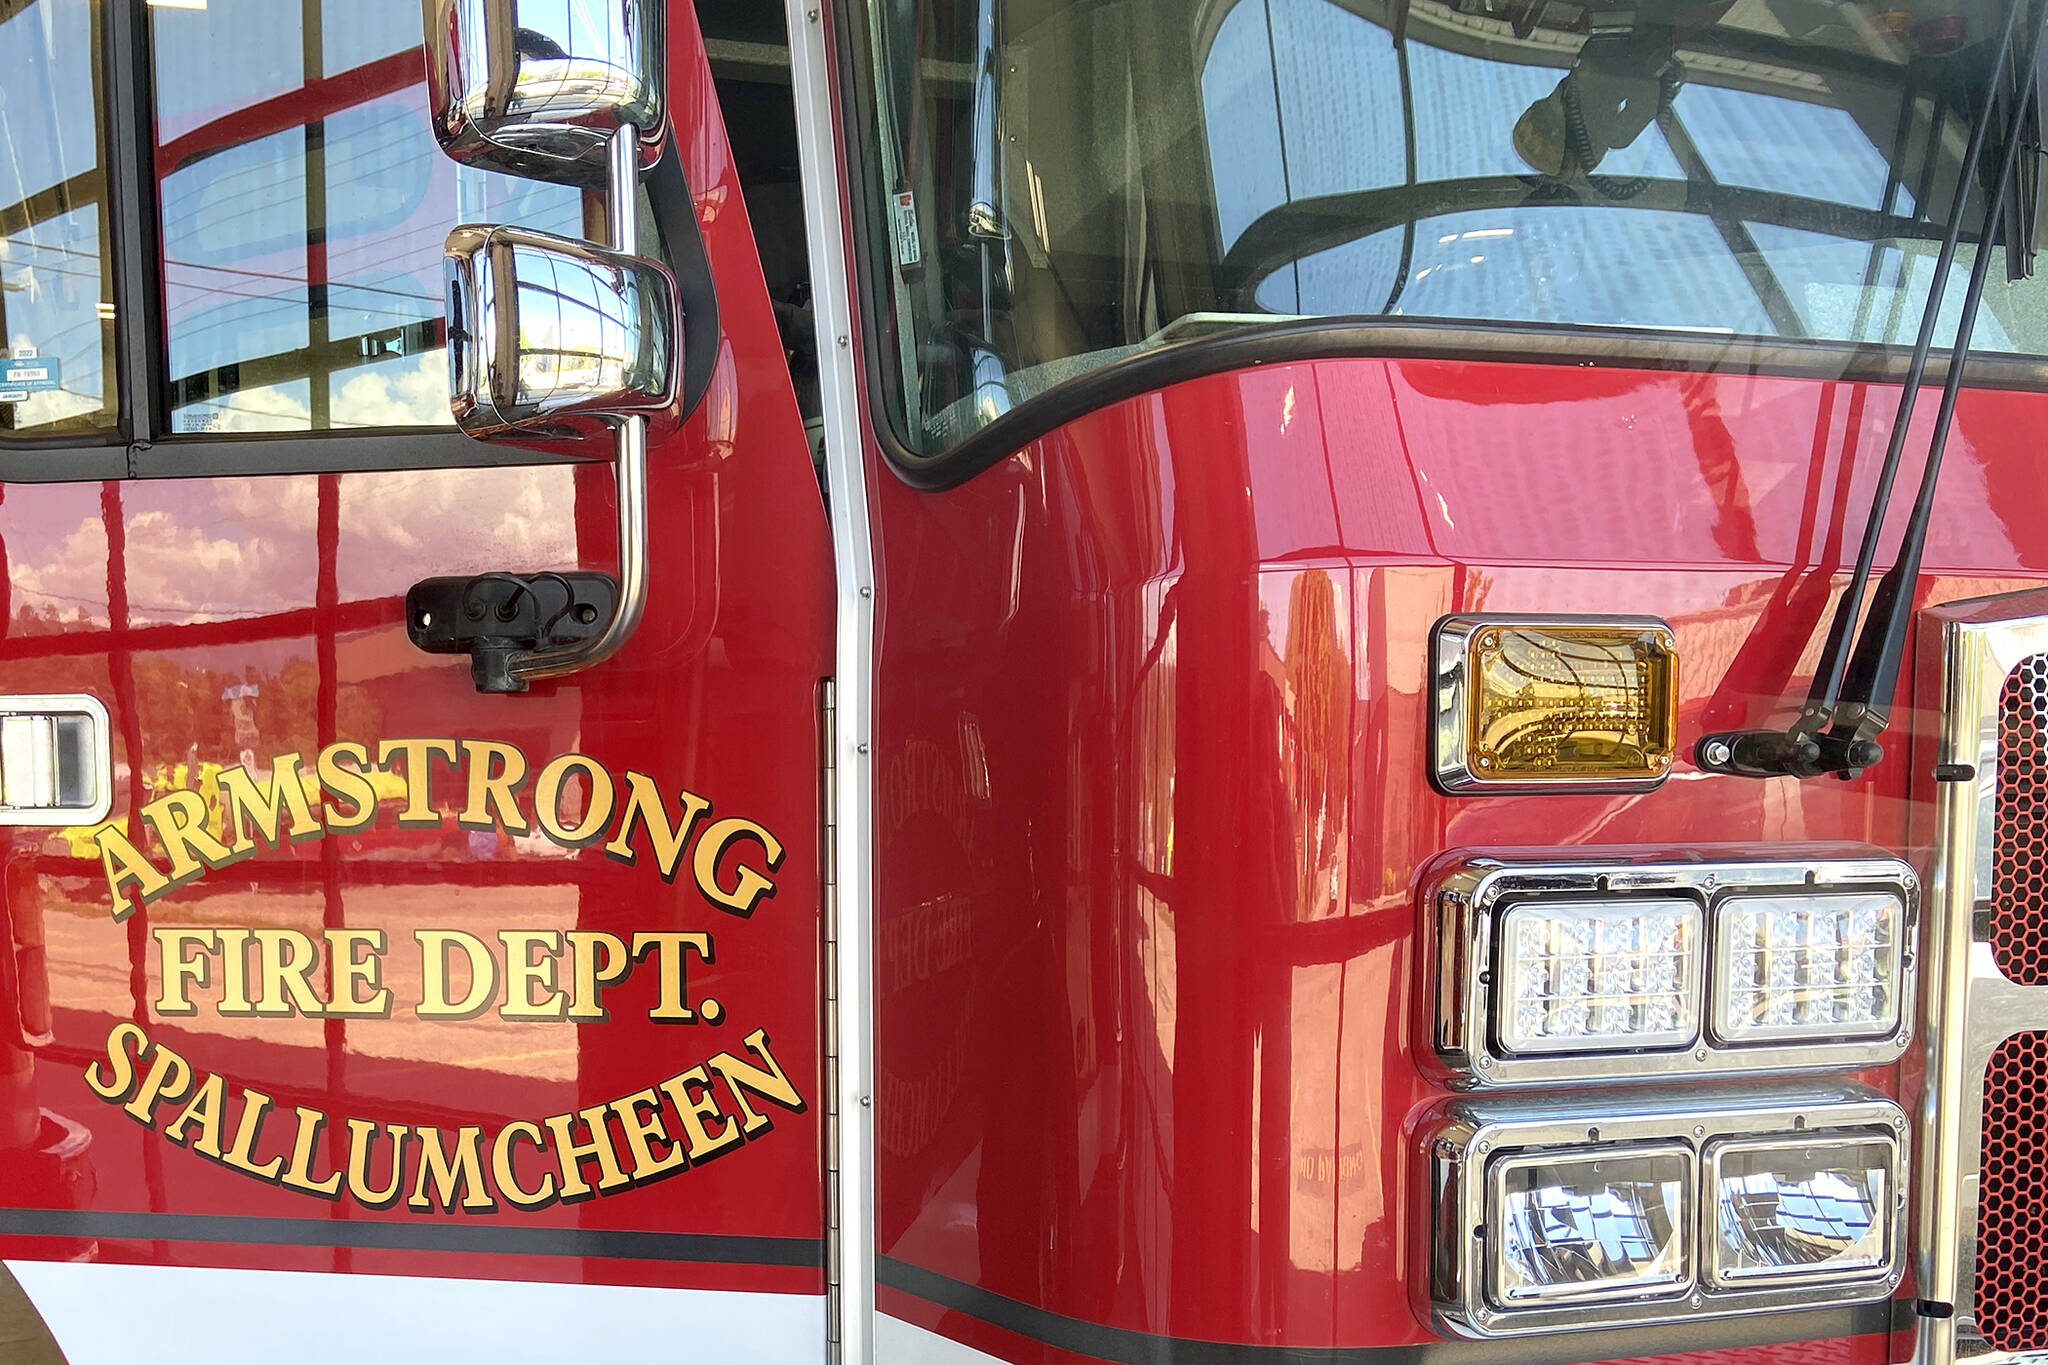 The Armstrong Spallumcheen Fire Department is one of 114 fire departments in B.C. to receive a share of $6.3 million in provincial funding for equipment and training, the B.C. government announced Thursday, Feb. 16, 2023. (Jennifer Smith - Morning Star)